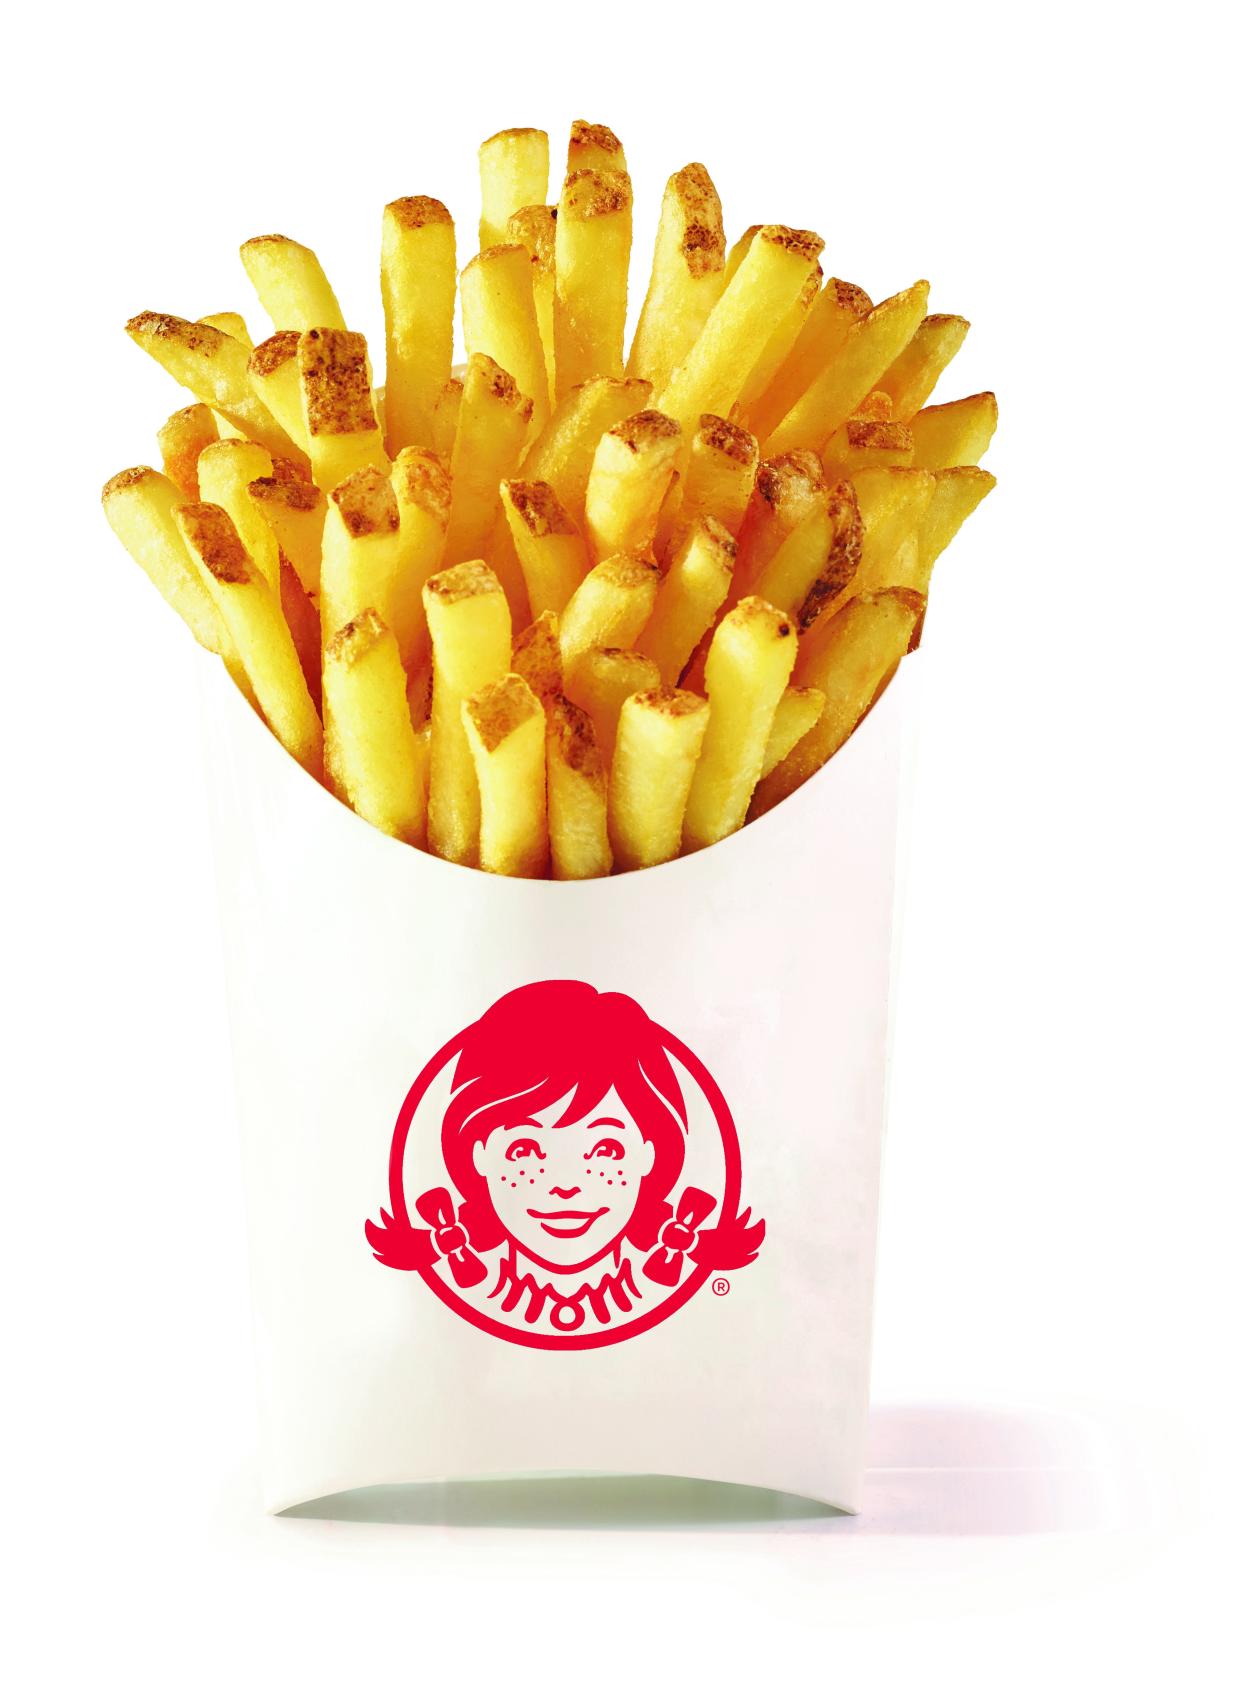 Wendy's is upgrading its French fries.